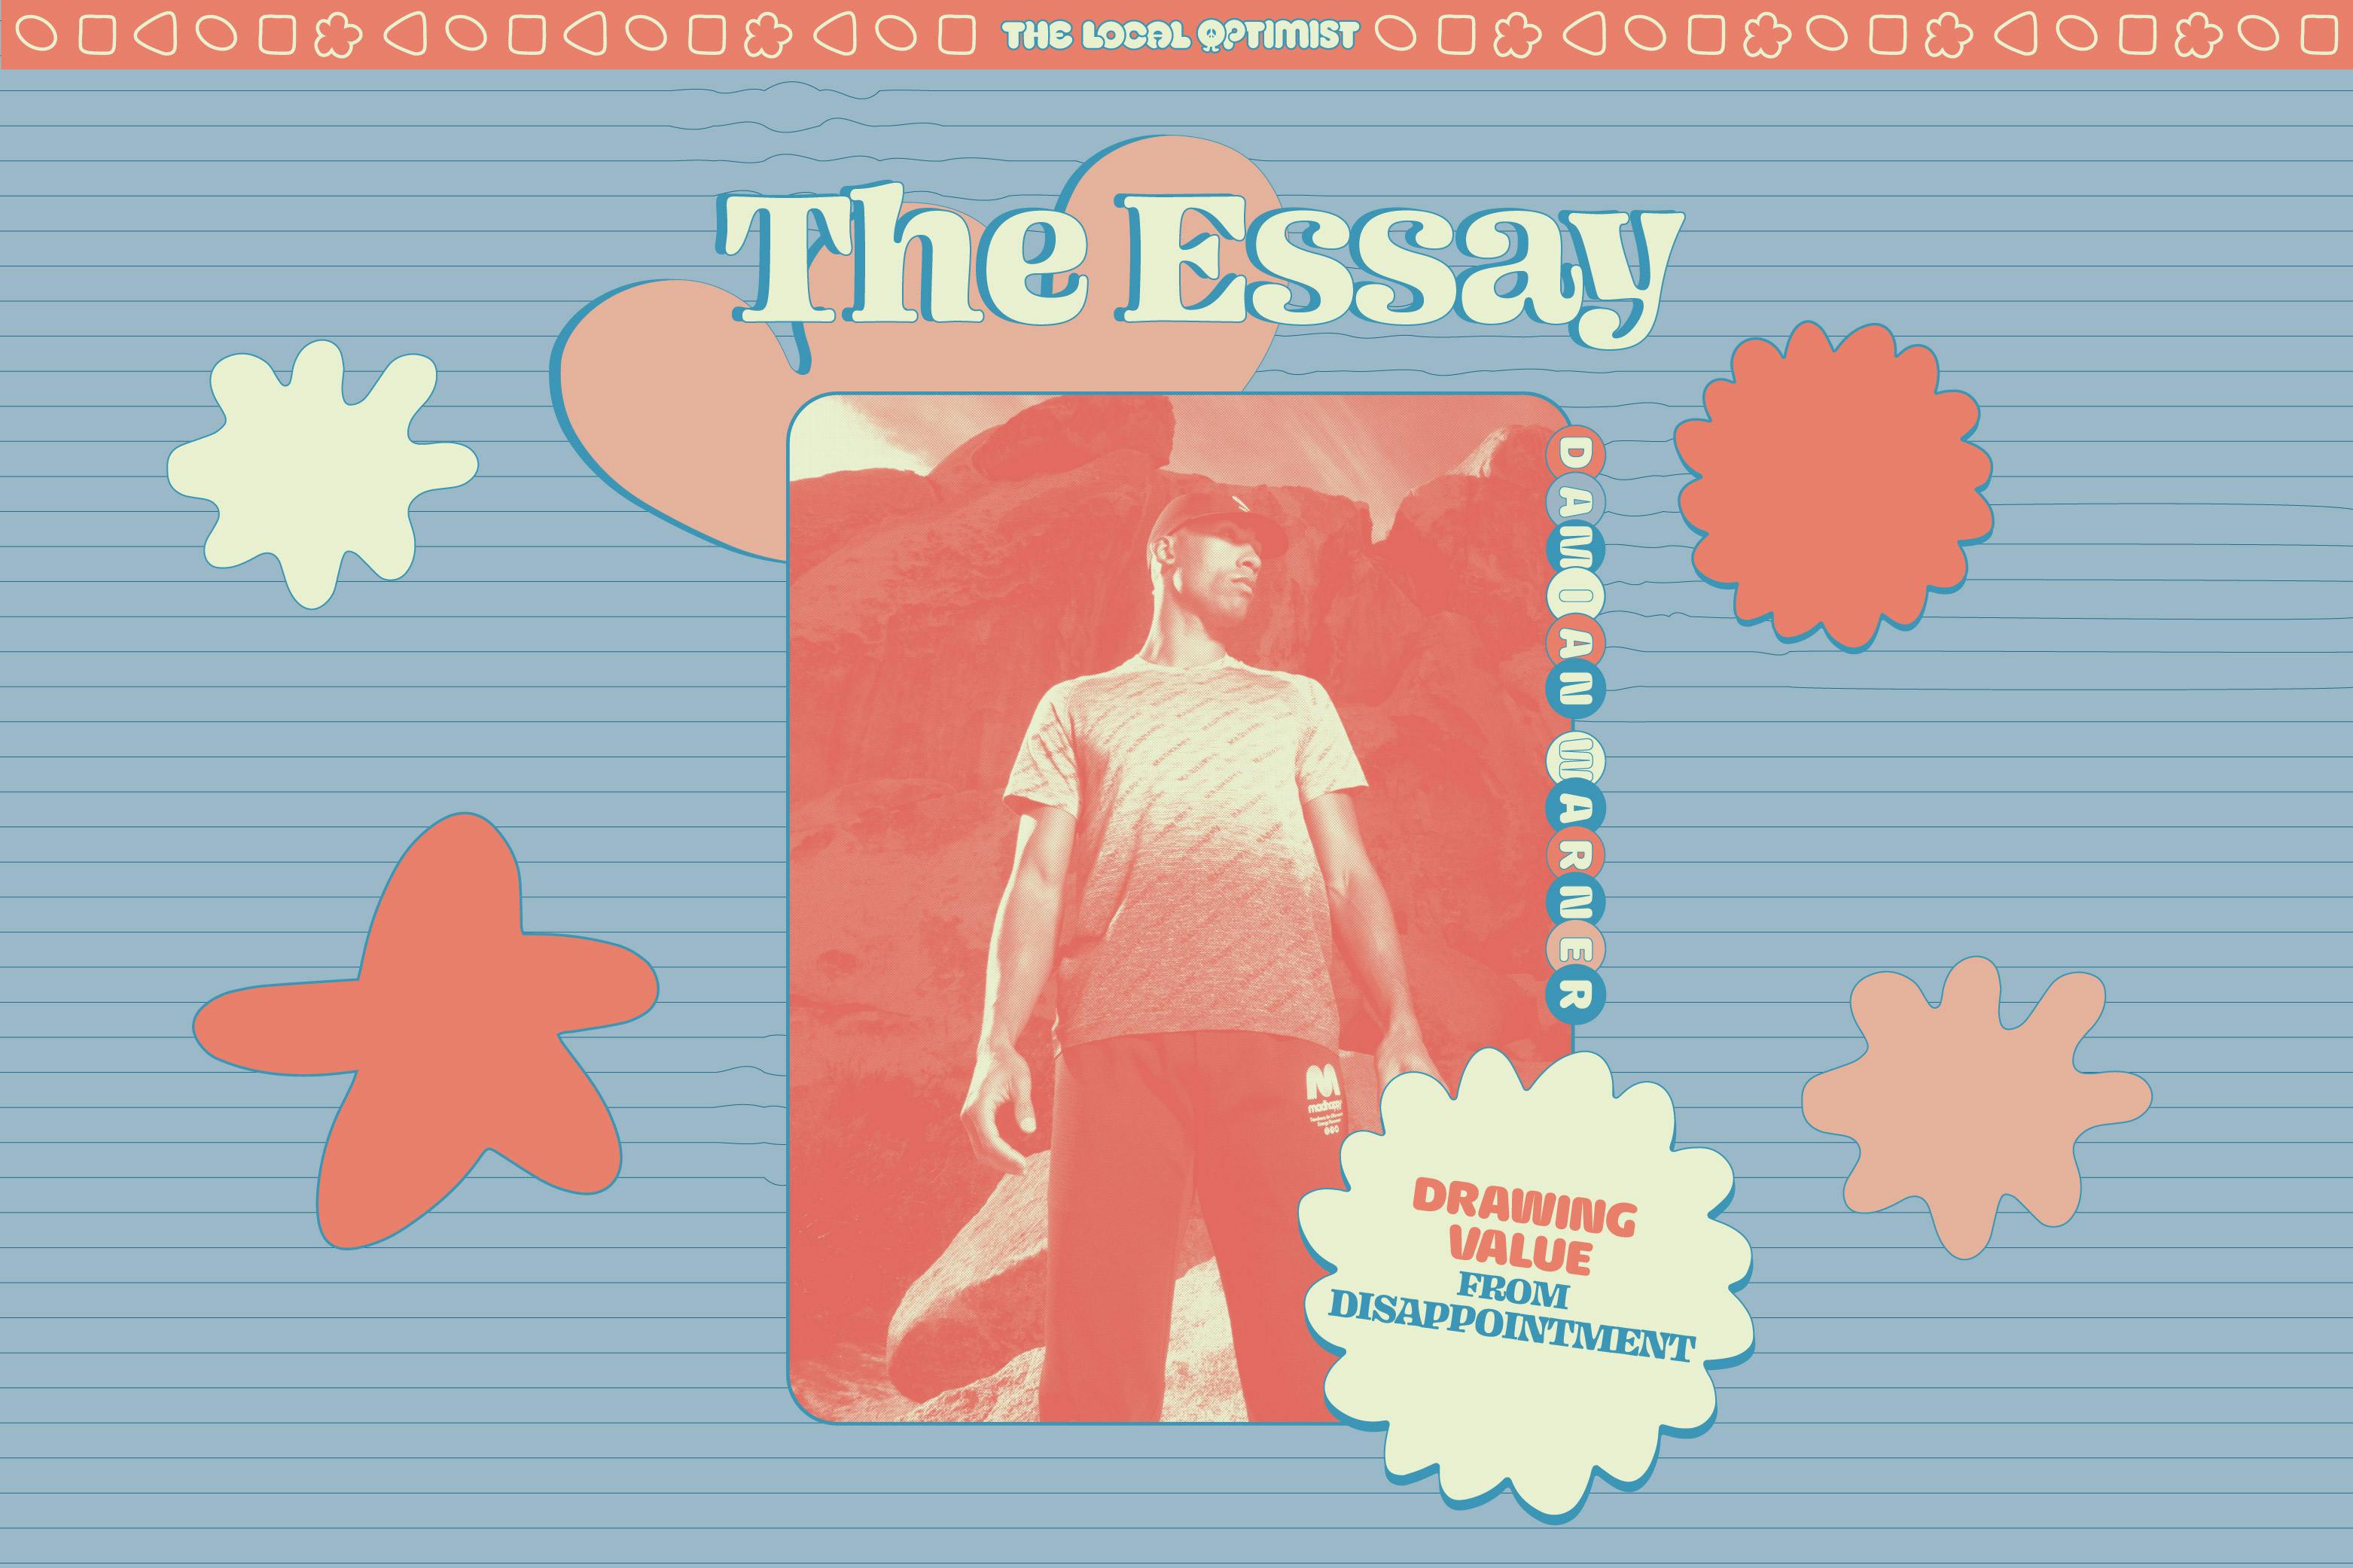 The Essay: Drawing Value From Dissapointment